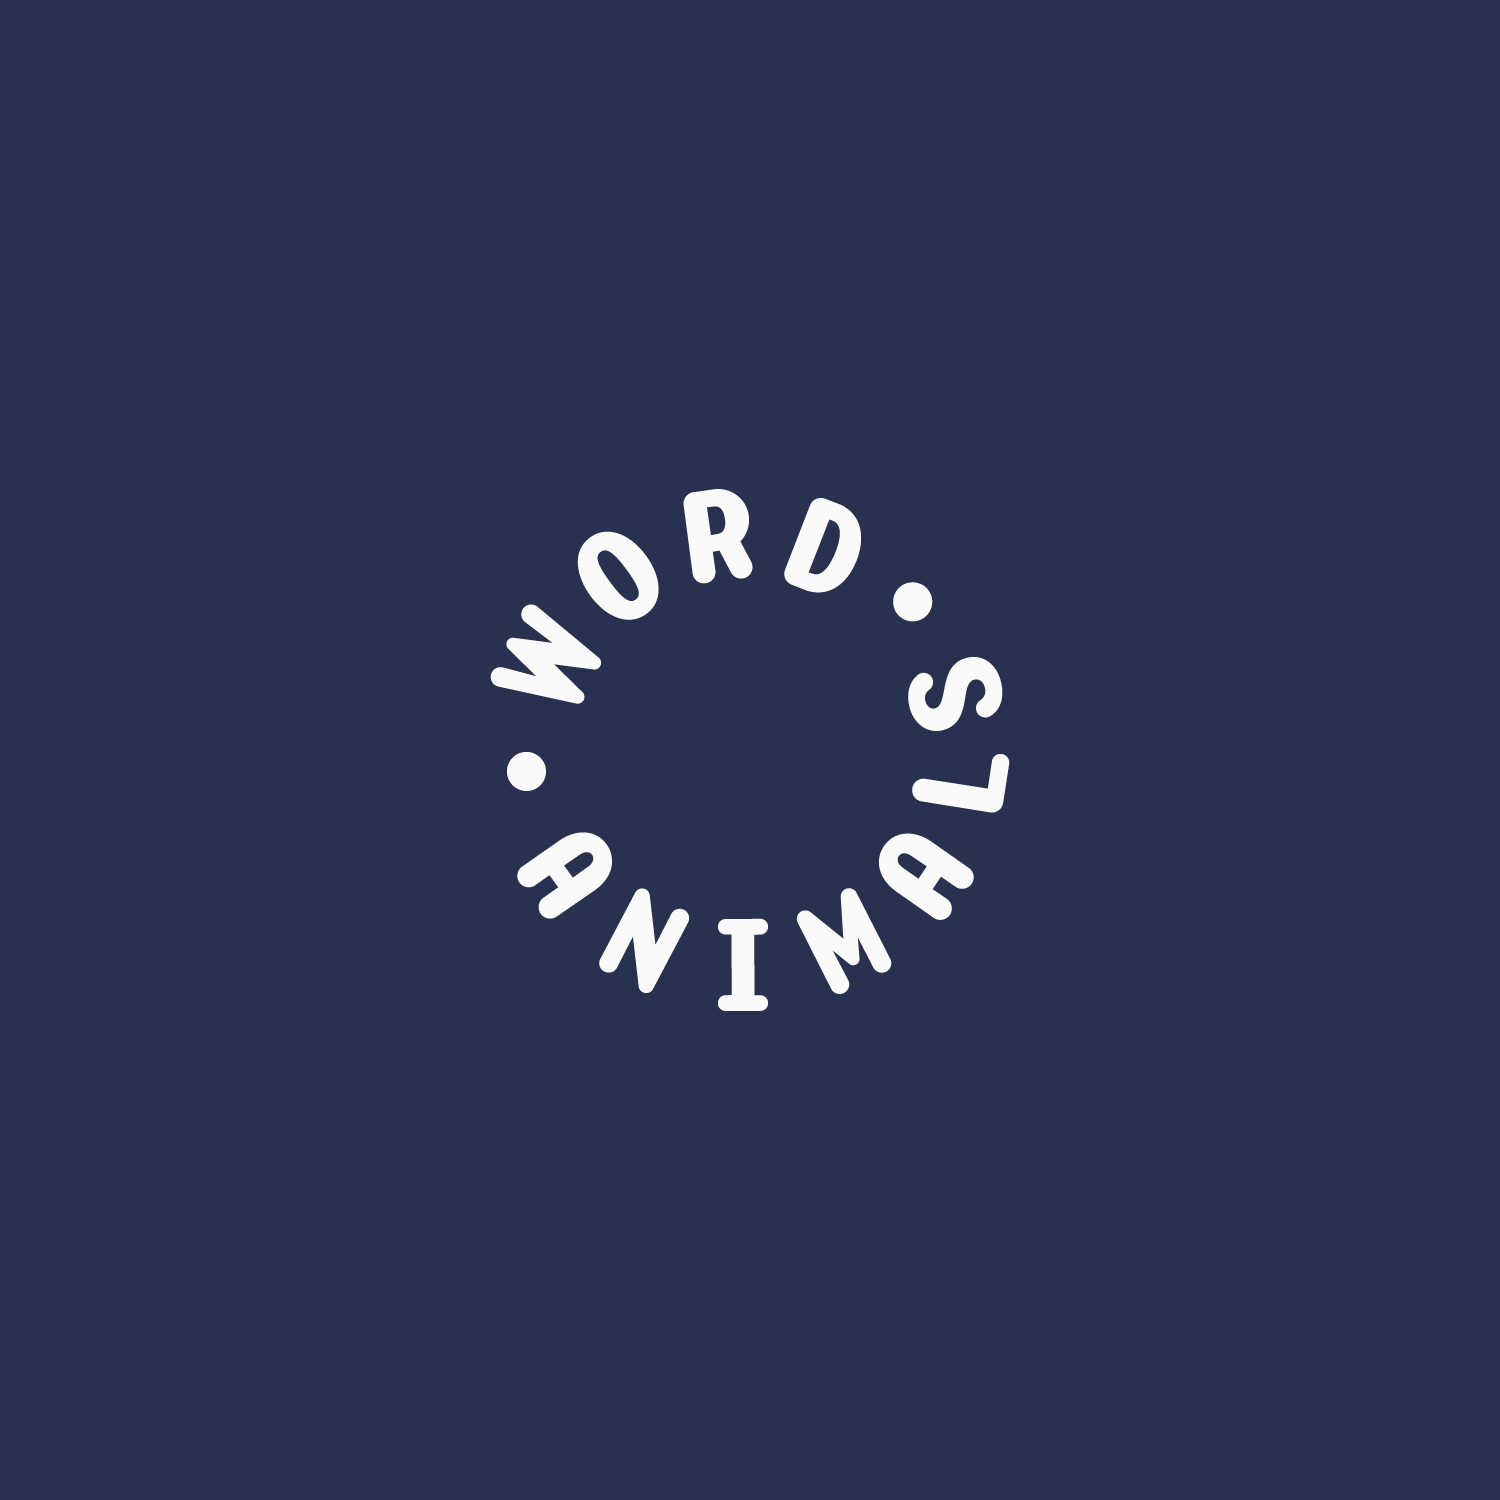 White circular Word Animals badge on a blue background